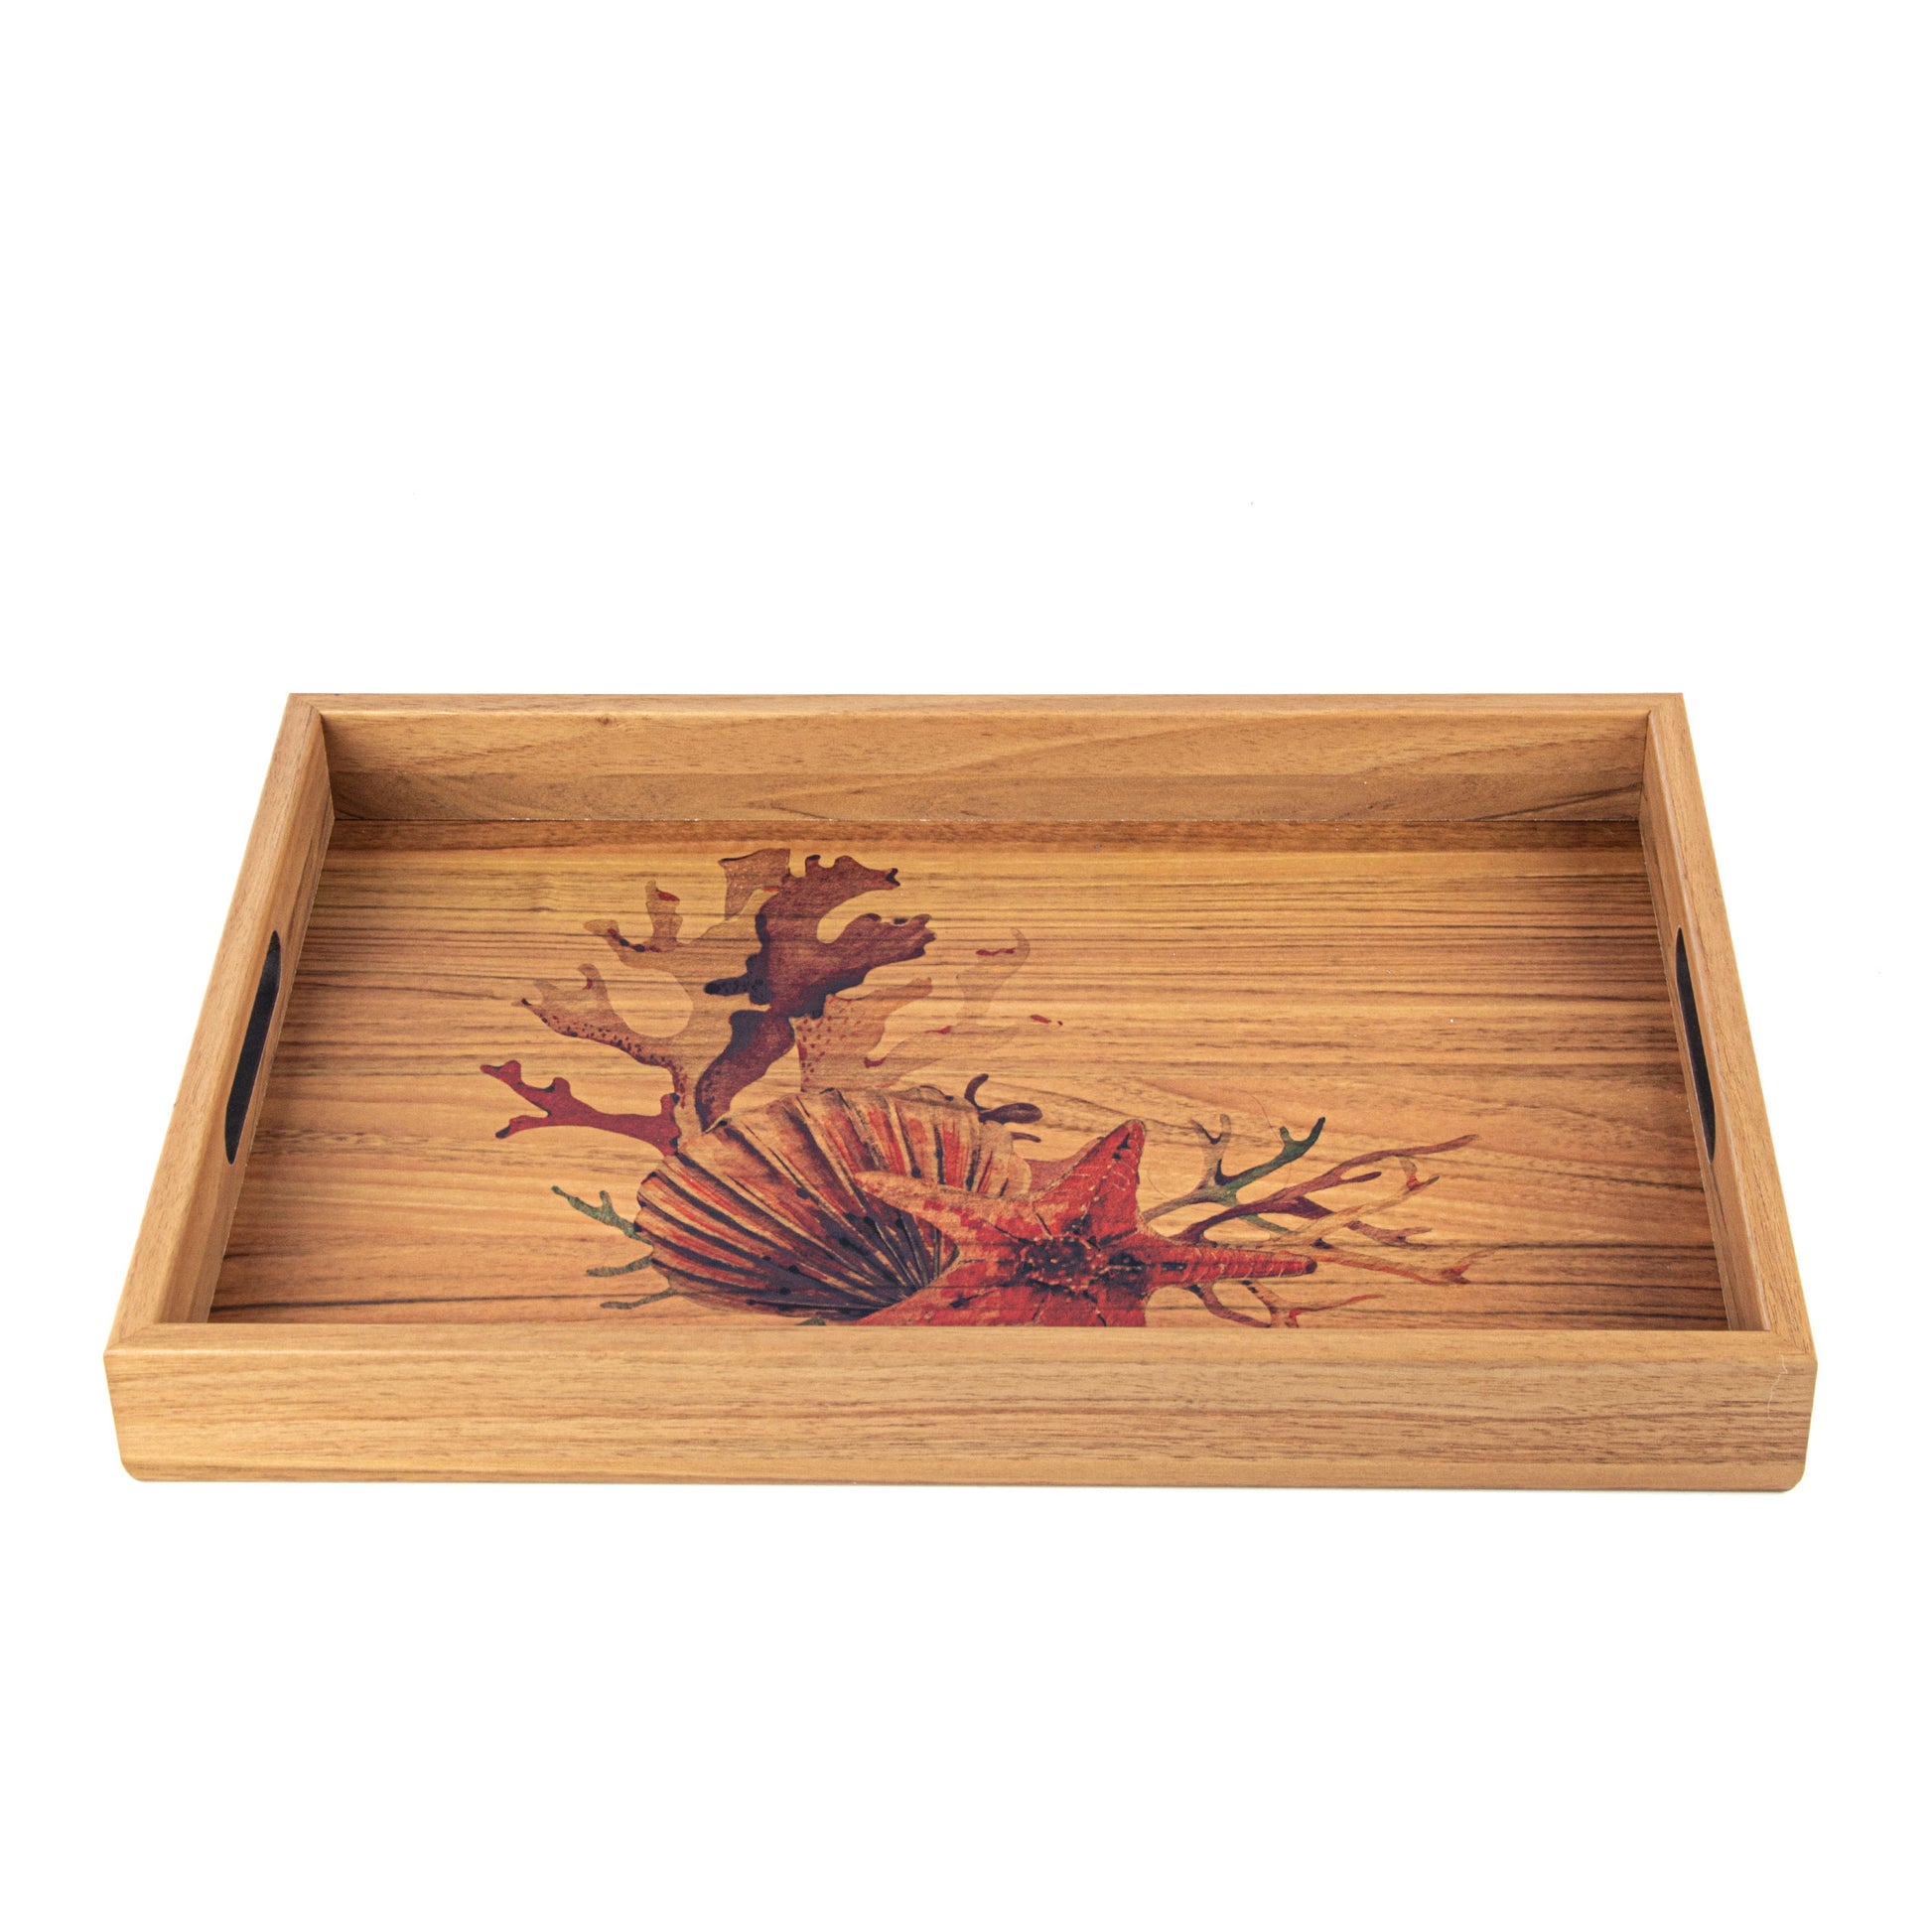 Artistic Wooden Tray with Sea Shell Printed Design - Luxury Game Room Decor - Premium Decorative Objects from MANOPOULOS Chess & Backgammon - Just €25! Shop now at MANOPOULOS Chess & Backgammon